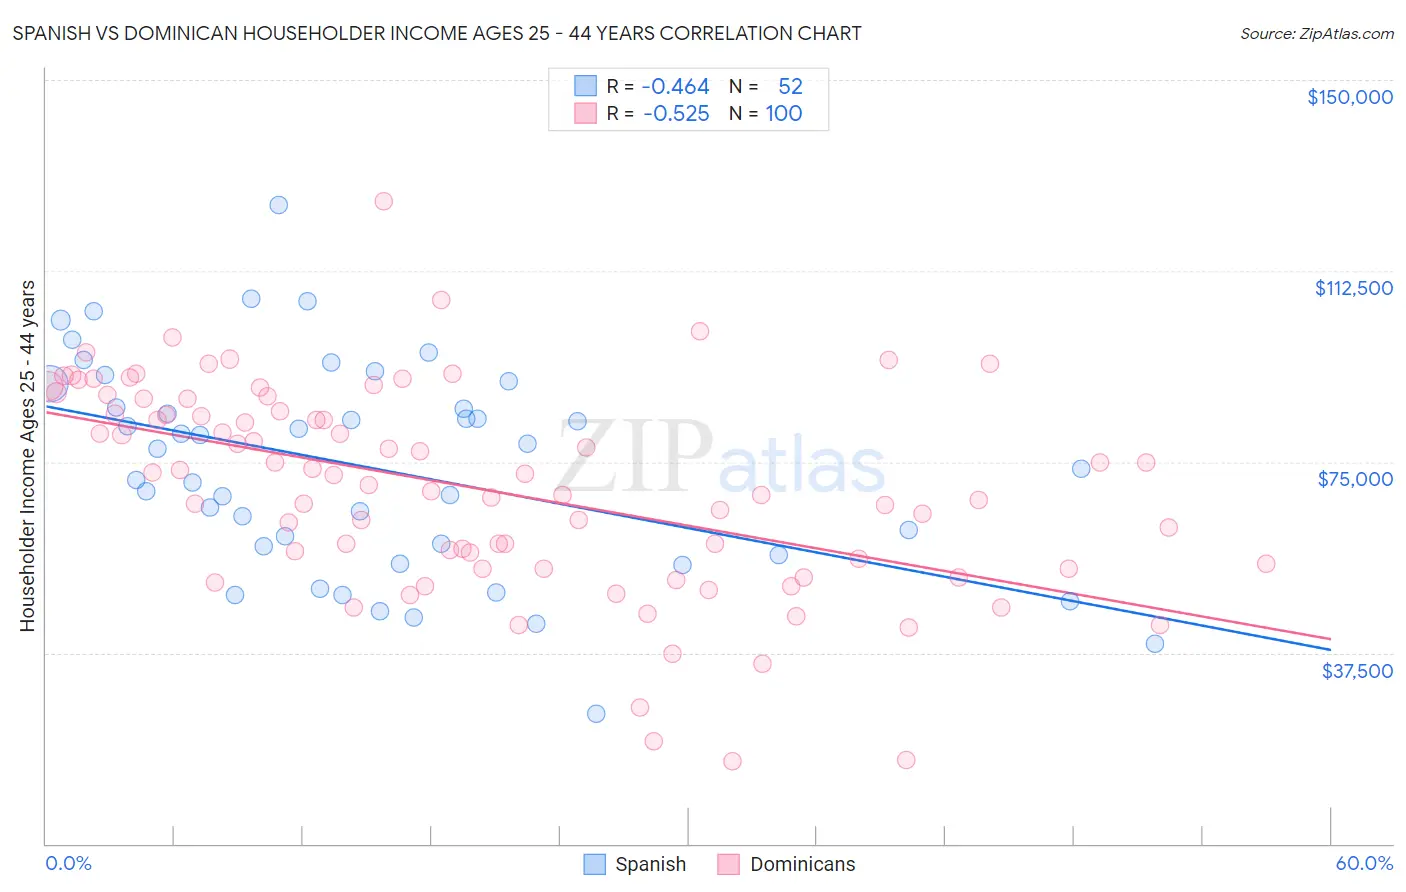 Spanish vs Dominican Householder Income Ages 25 - 44 years